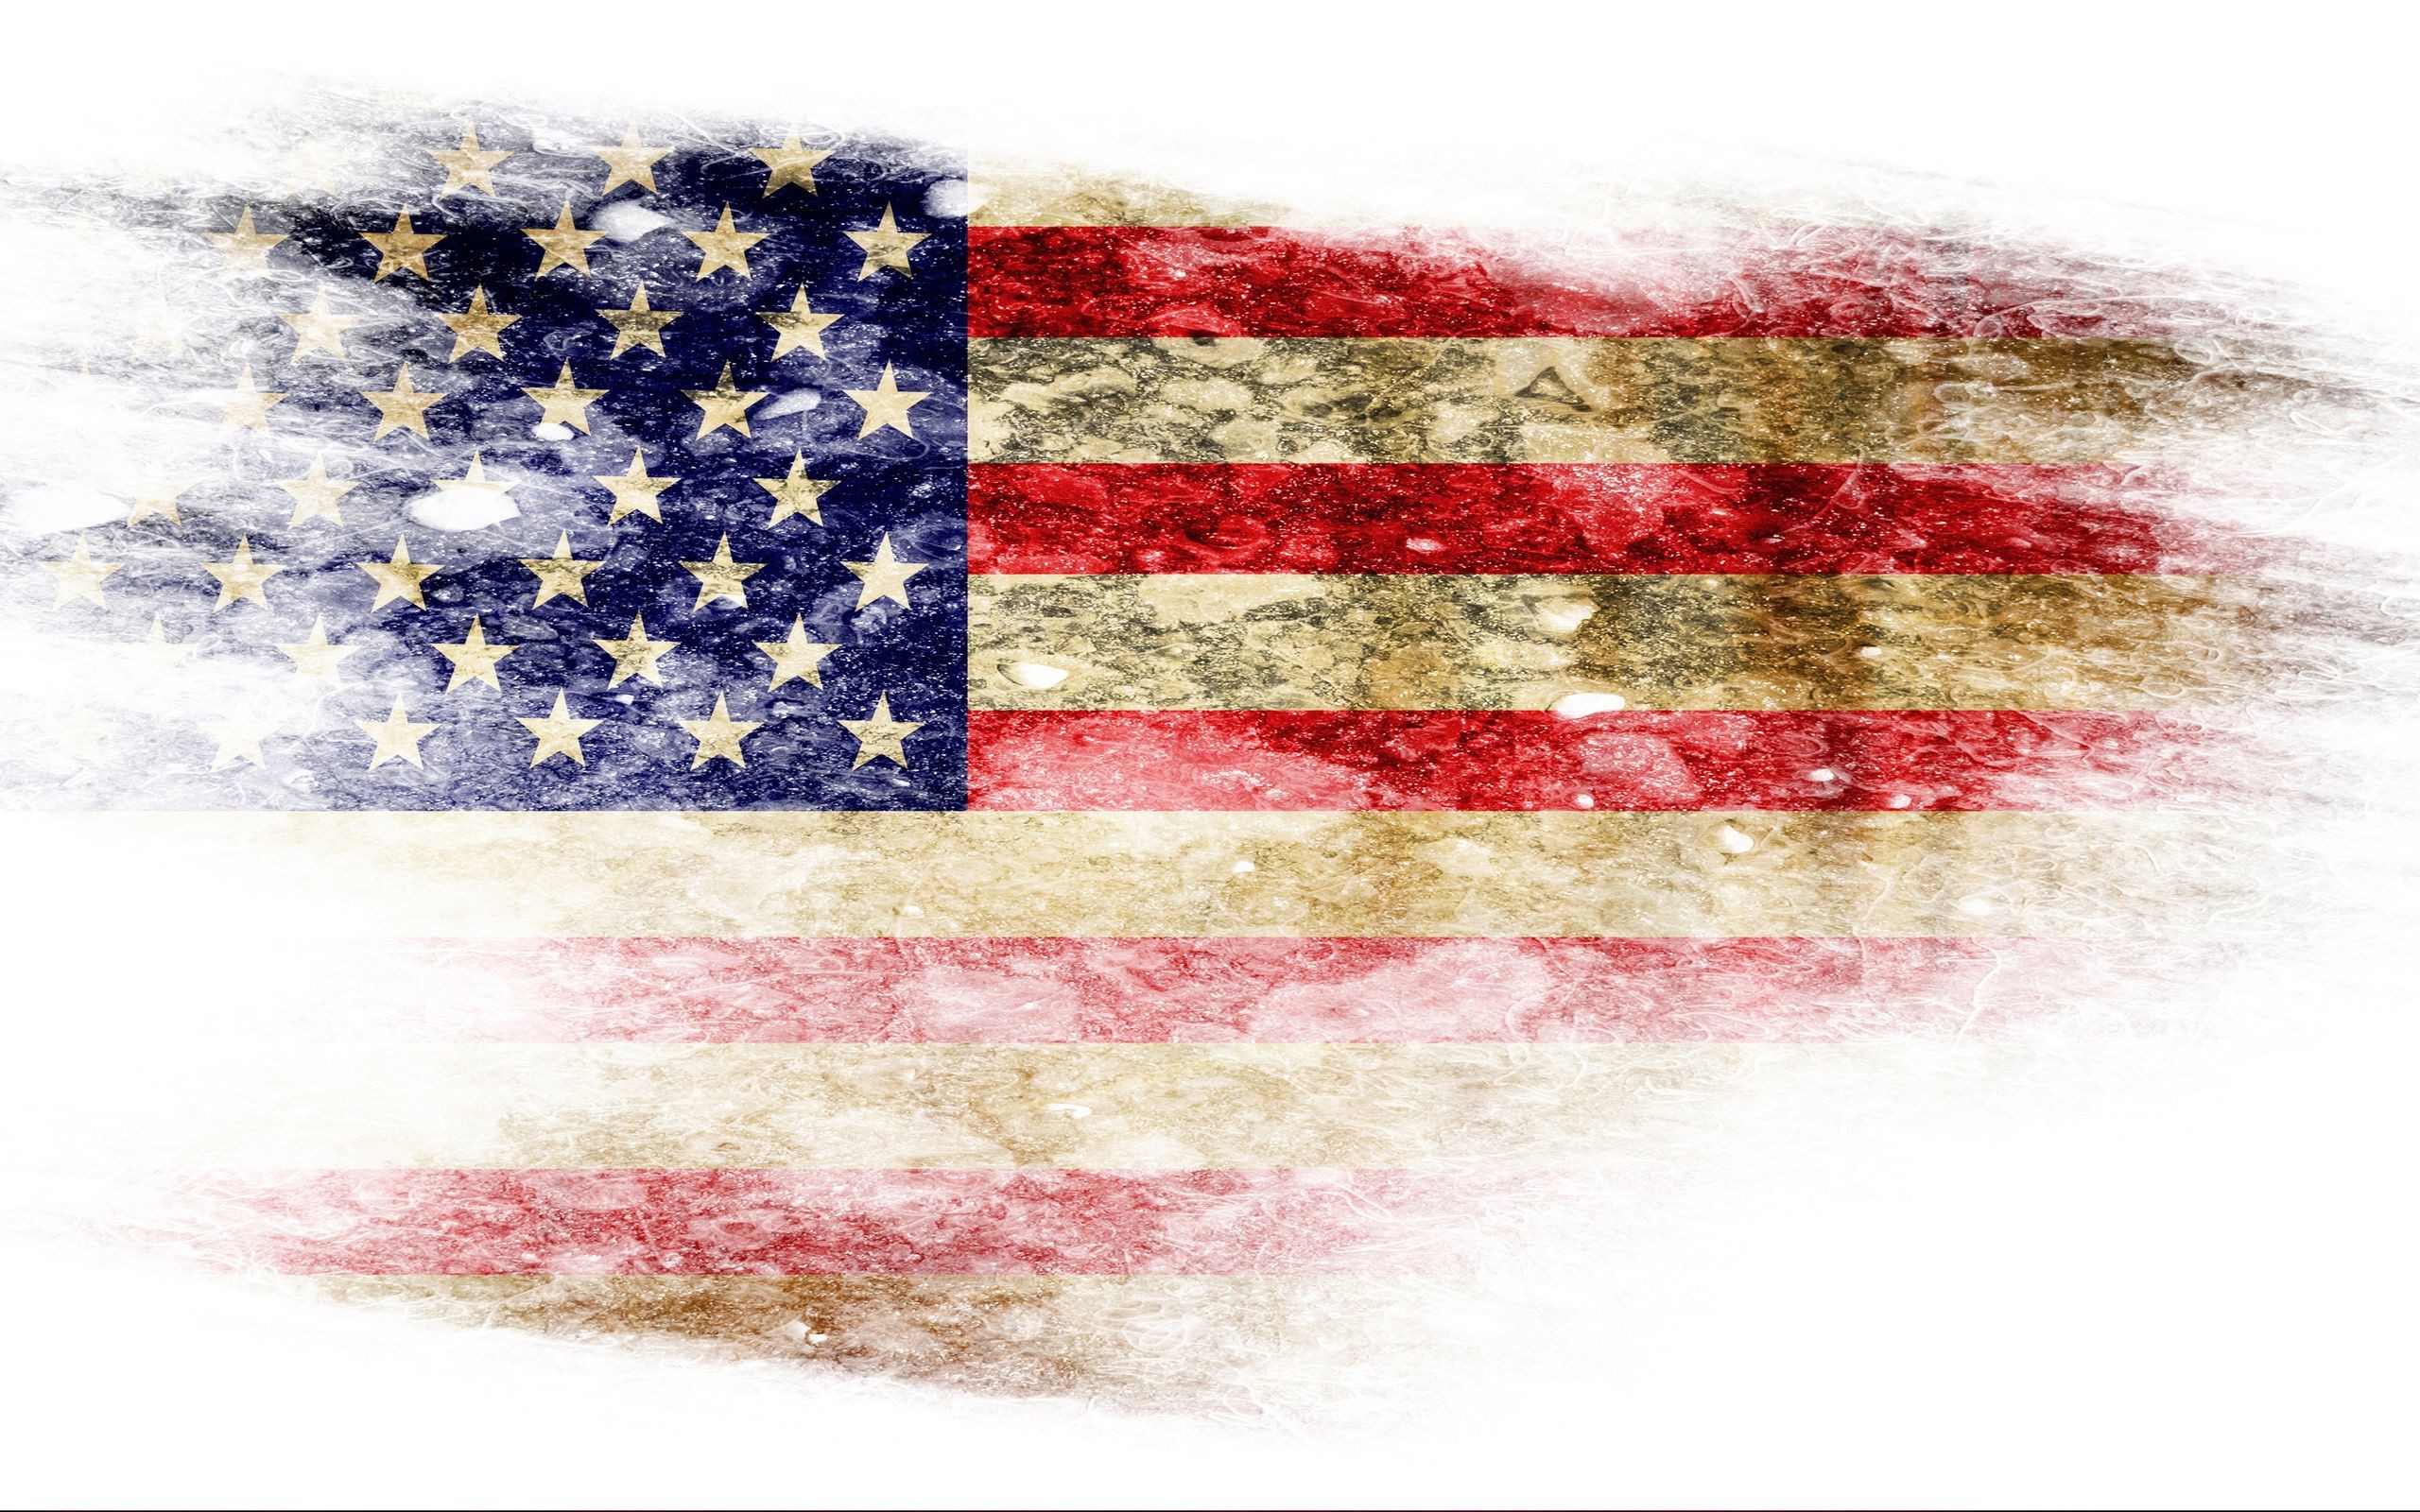 2560x1600 American Flag Backgrounds | Wallpapers, Backgrounds, Images, Art ..